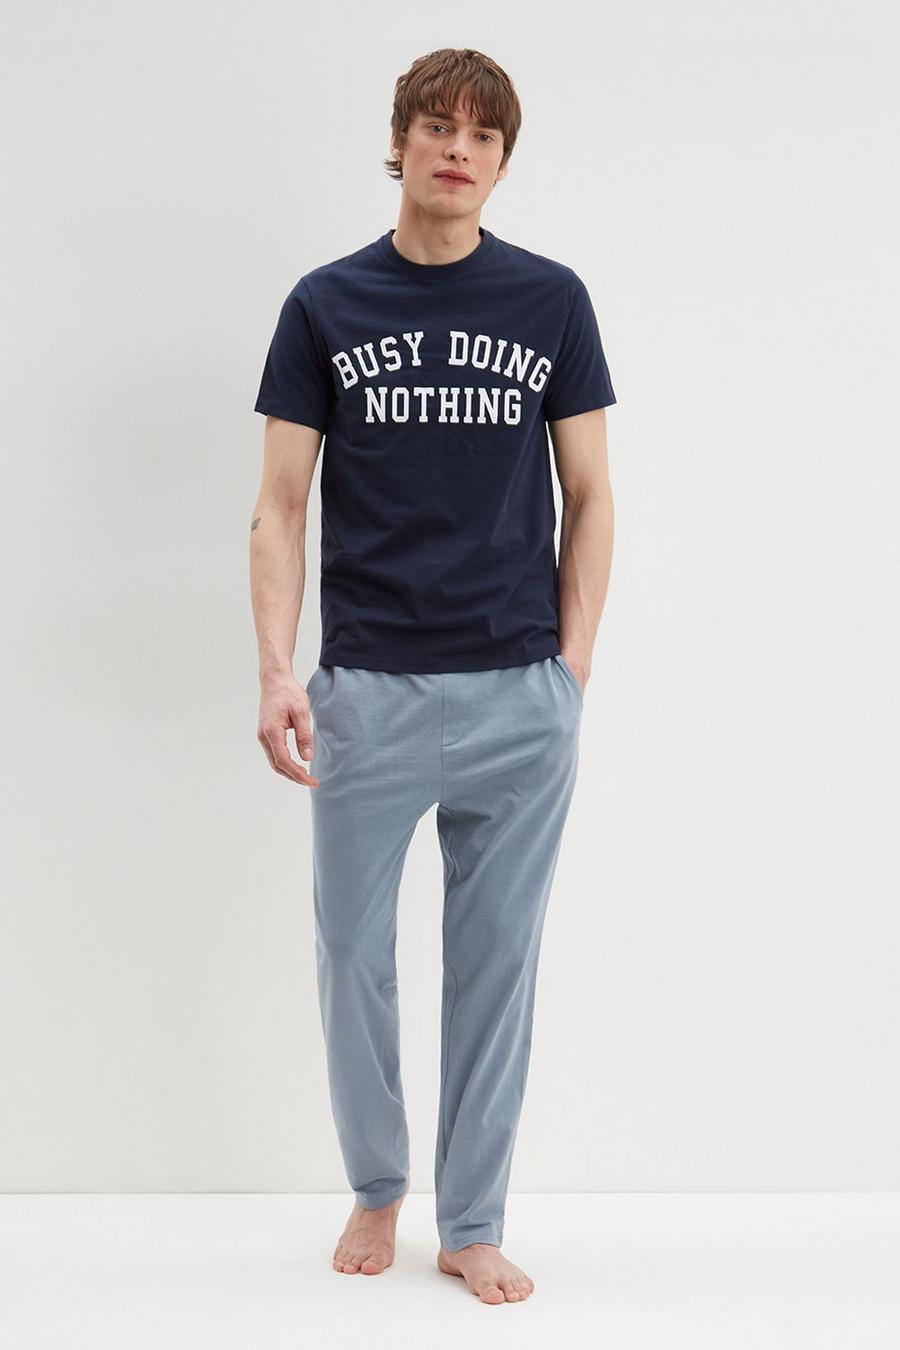 Busy Doing Nothing Top & Bottoms Pyjama Set